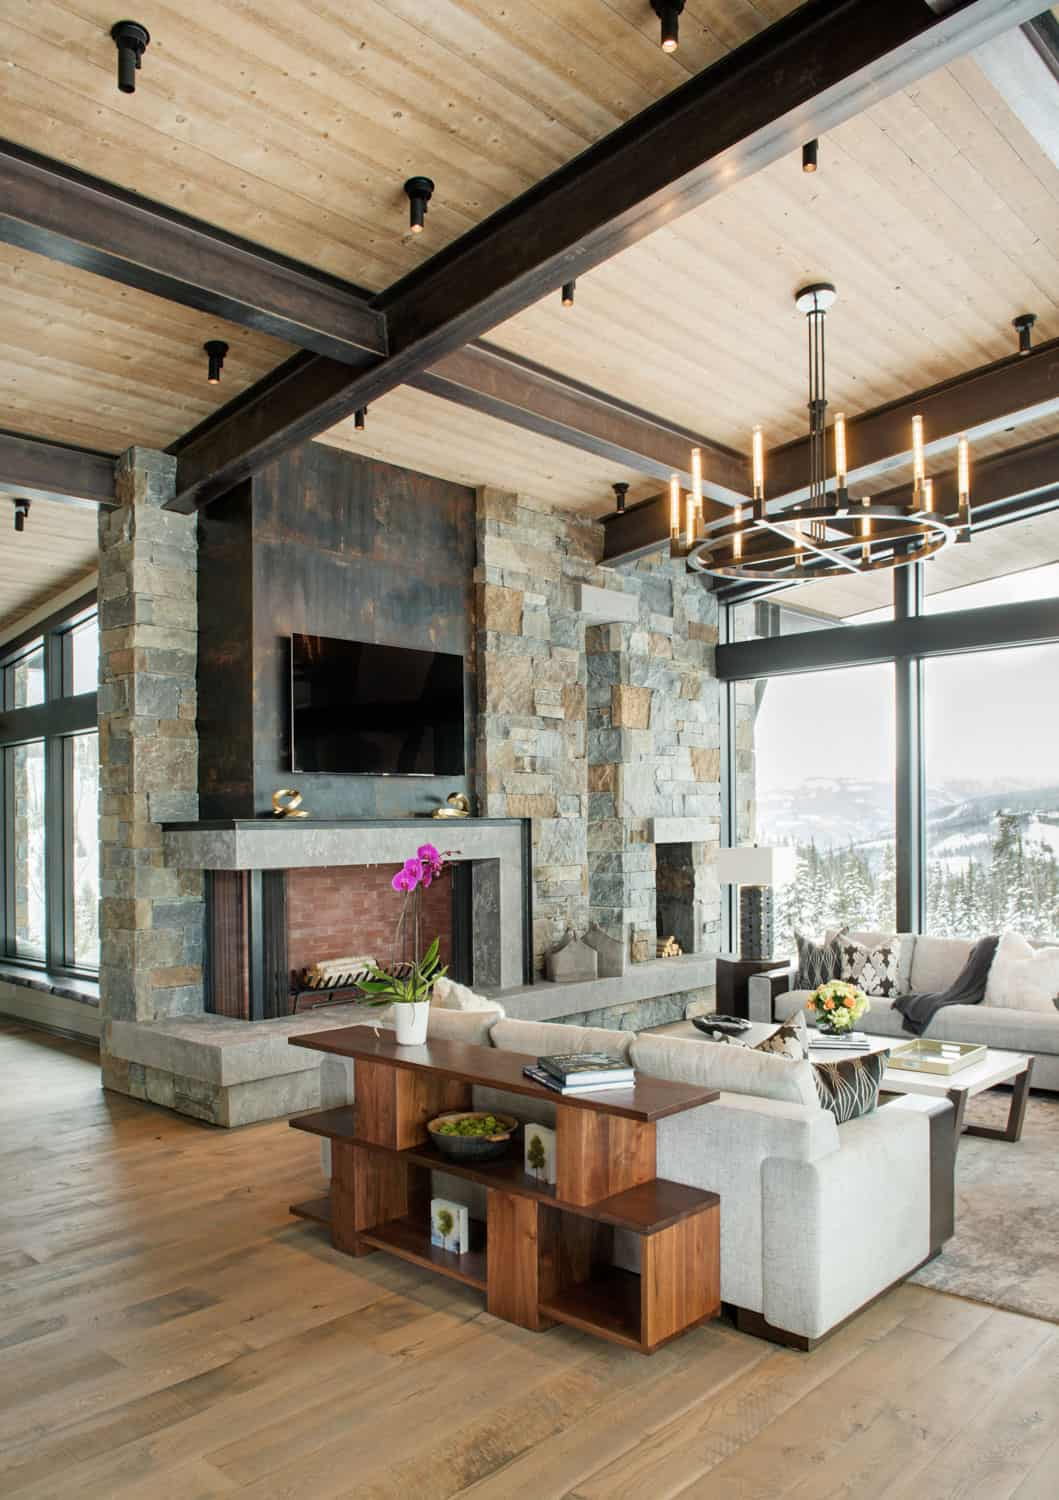 rustic modern mountain living room homes country architecture style contemporary views furniture sky rooms great interior decorating decor lodge designs